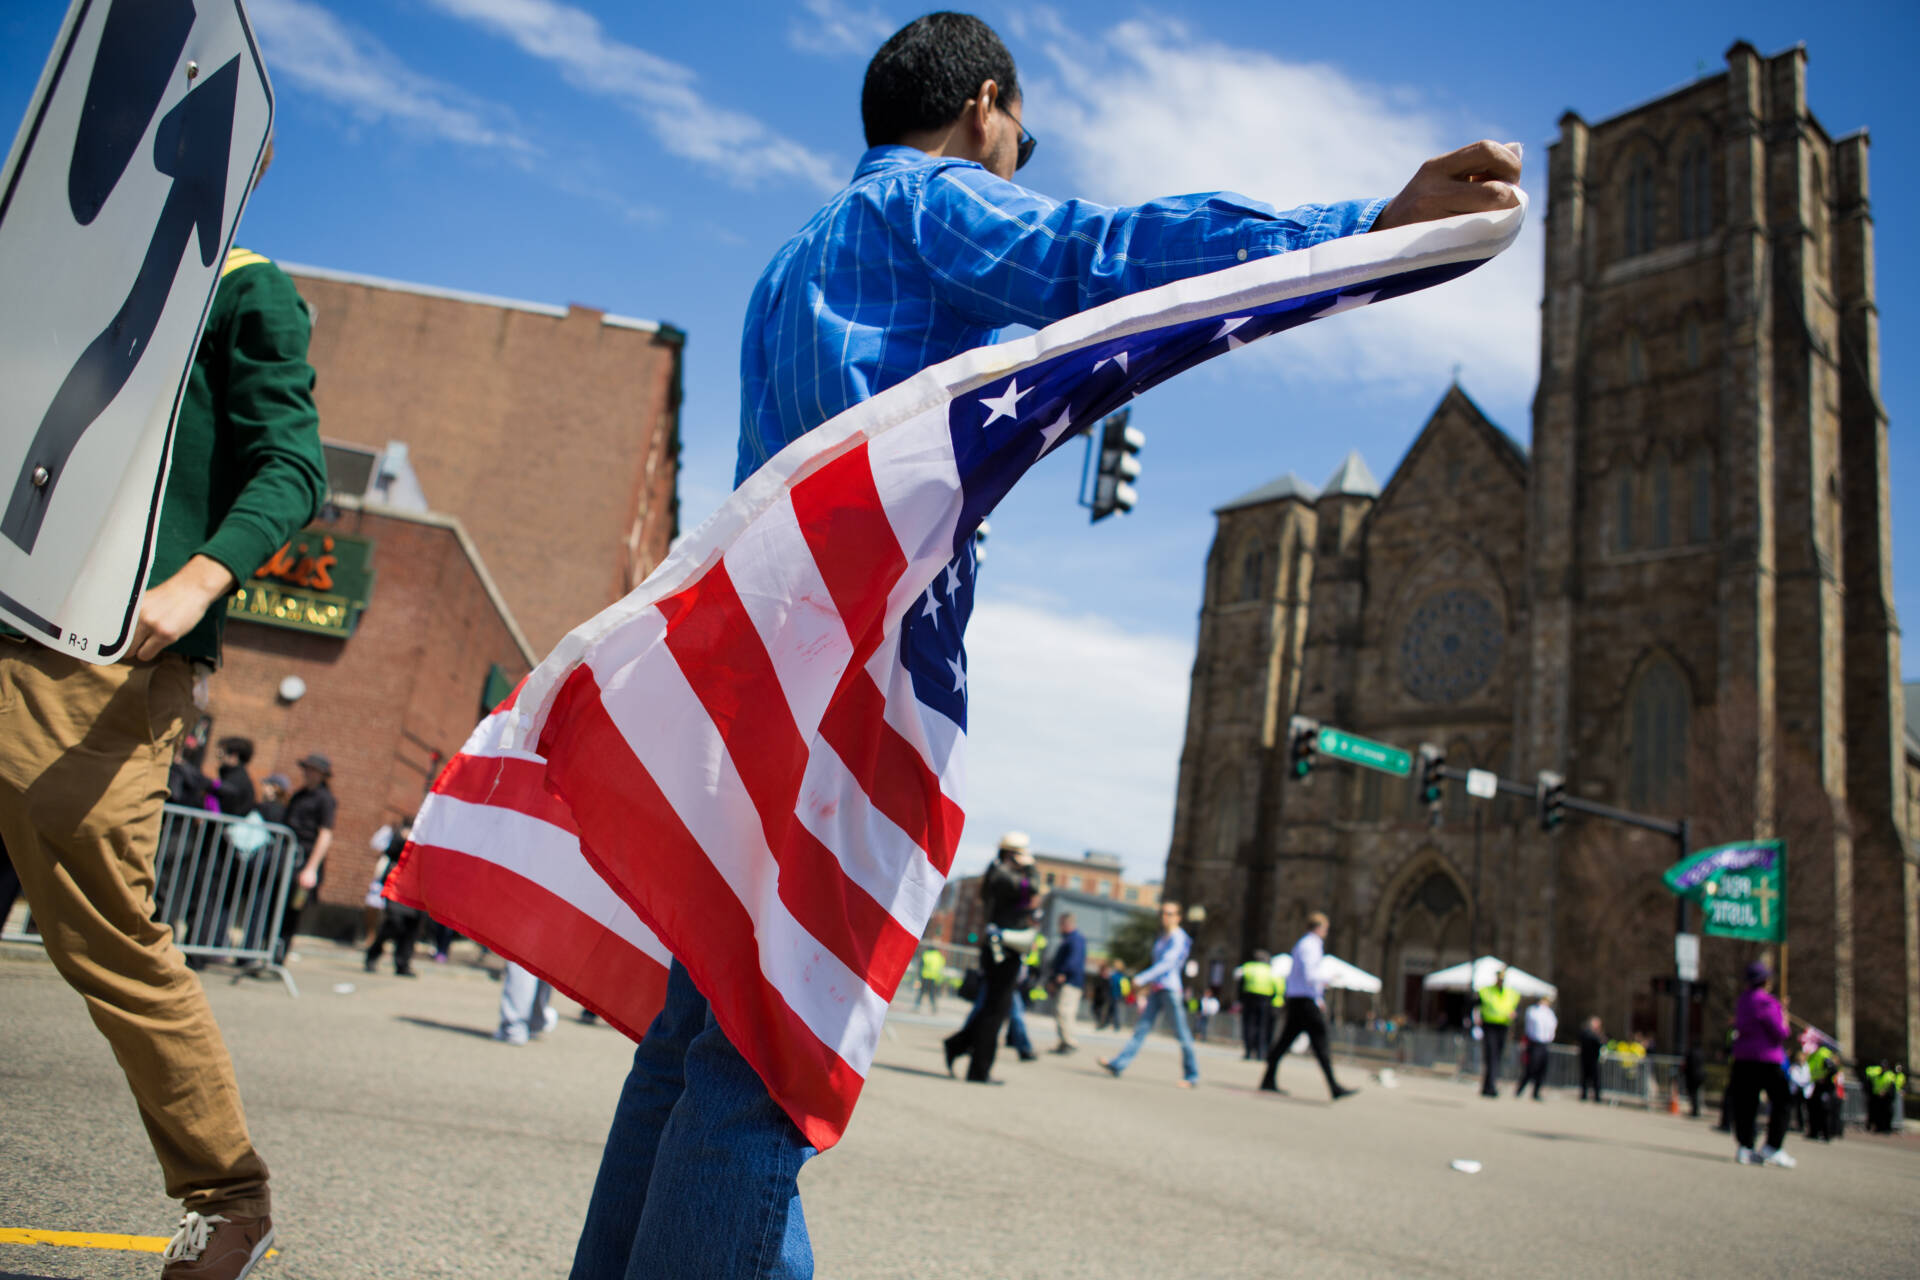 Jose Bricena, of Cambridge, holds an American flag outside the Cathedral of the Holy Cross, where then-President Barack Obama spoke to honor the victims of the Boston Marathon bombings. (Jesse Costa/WBUR)